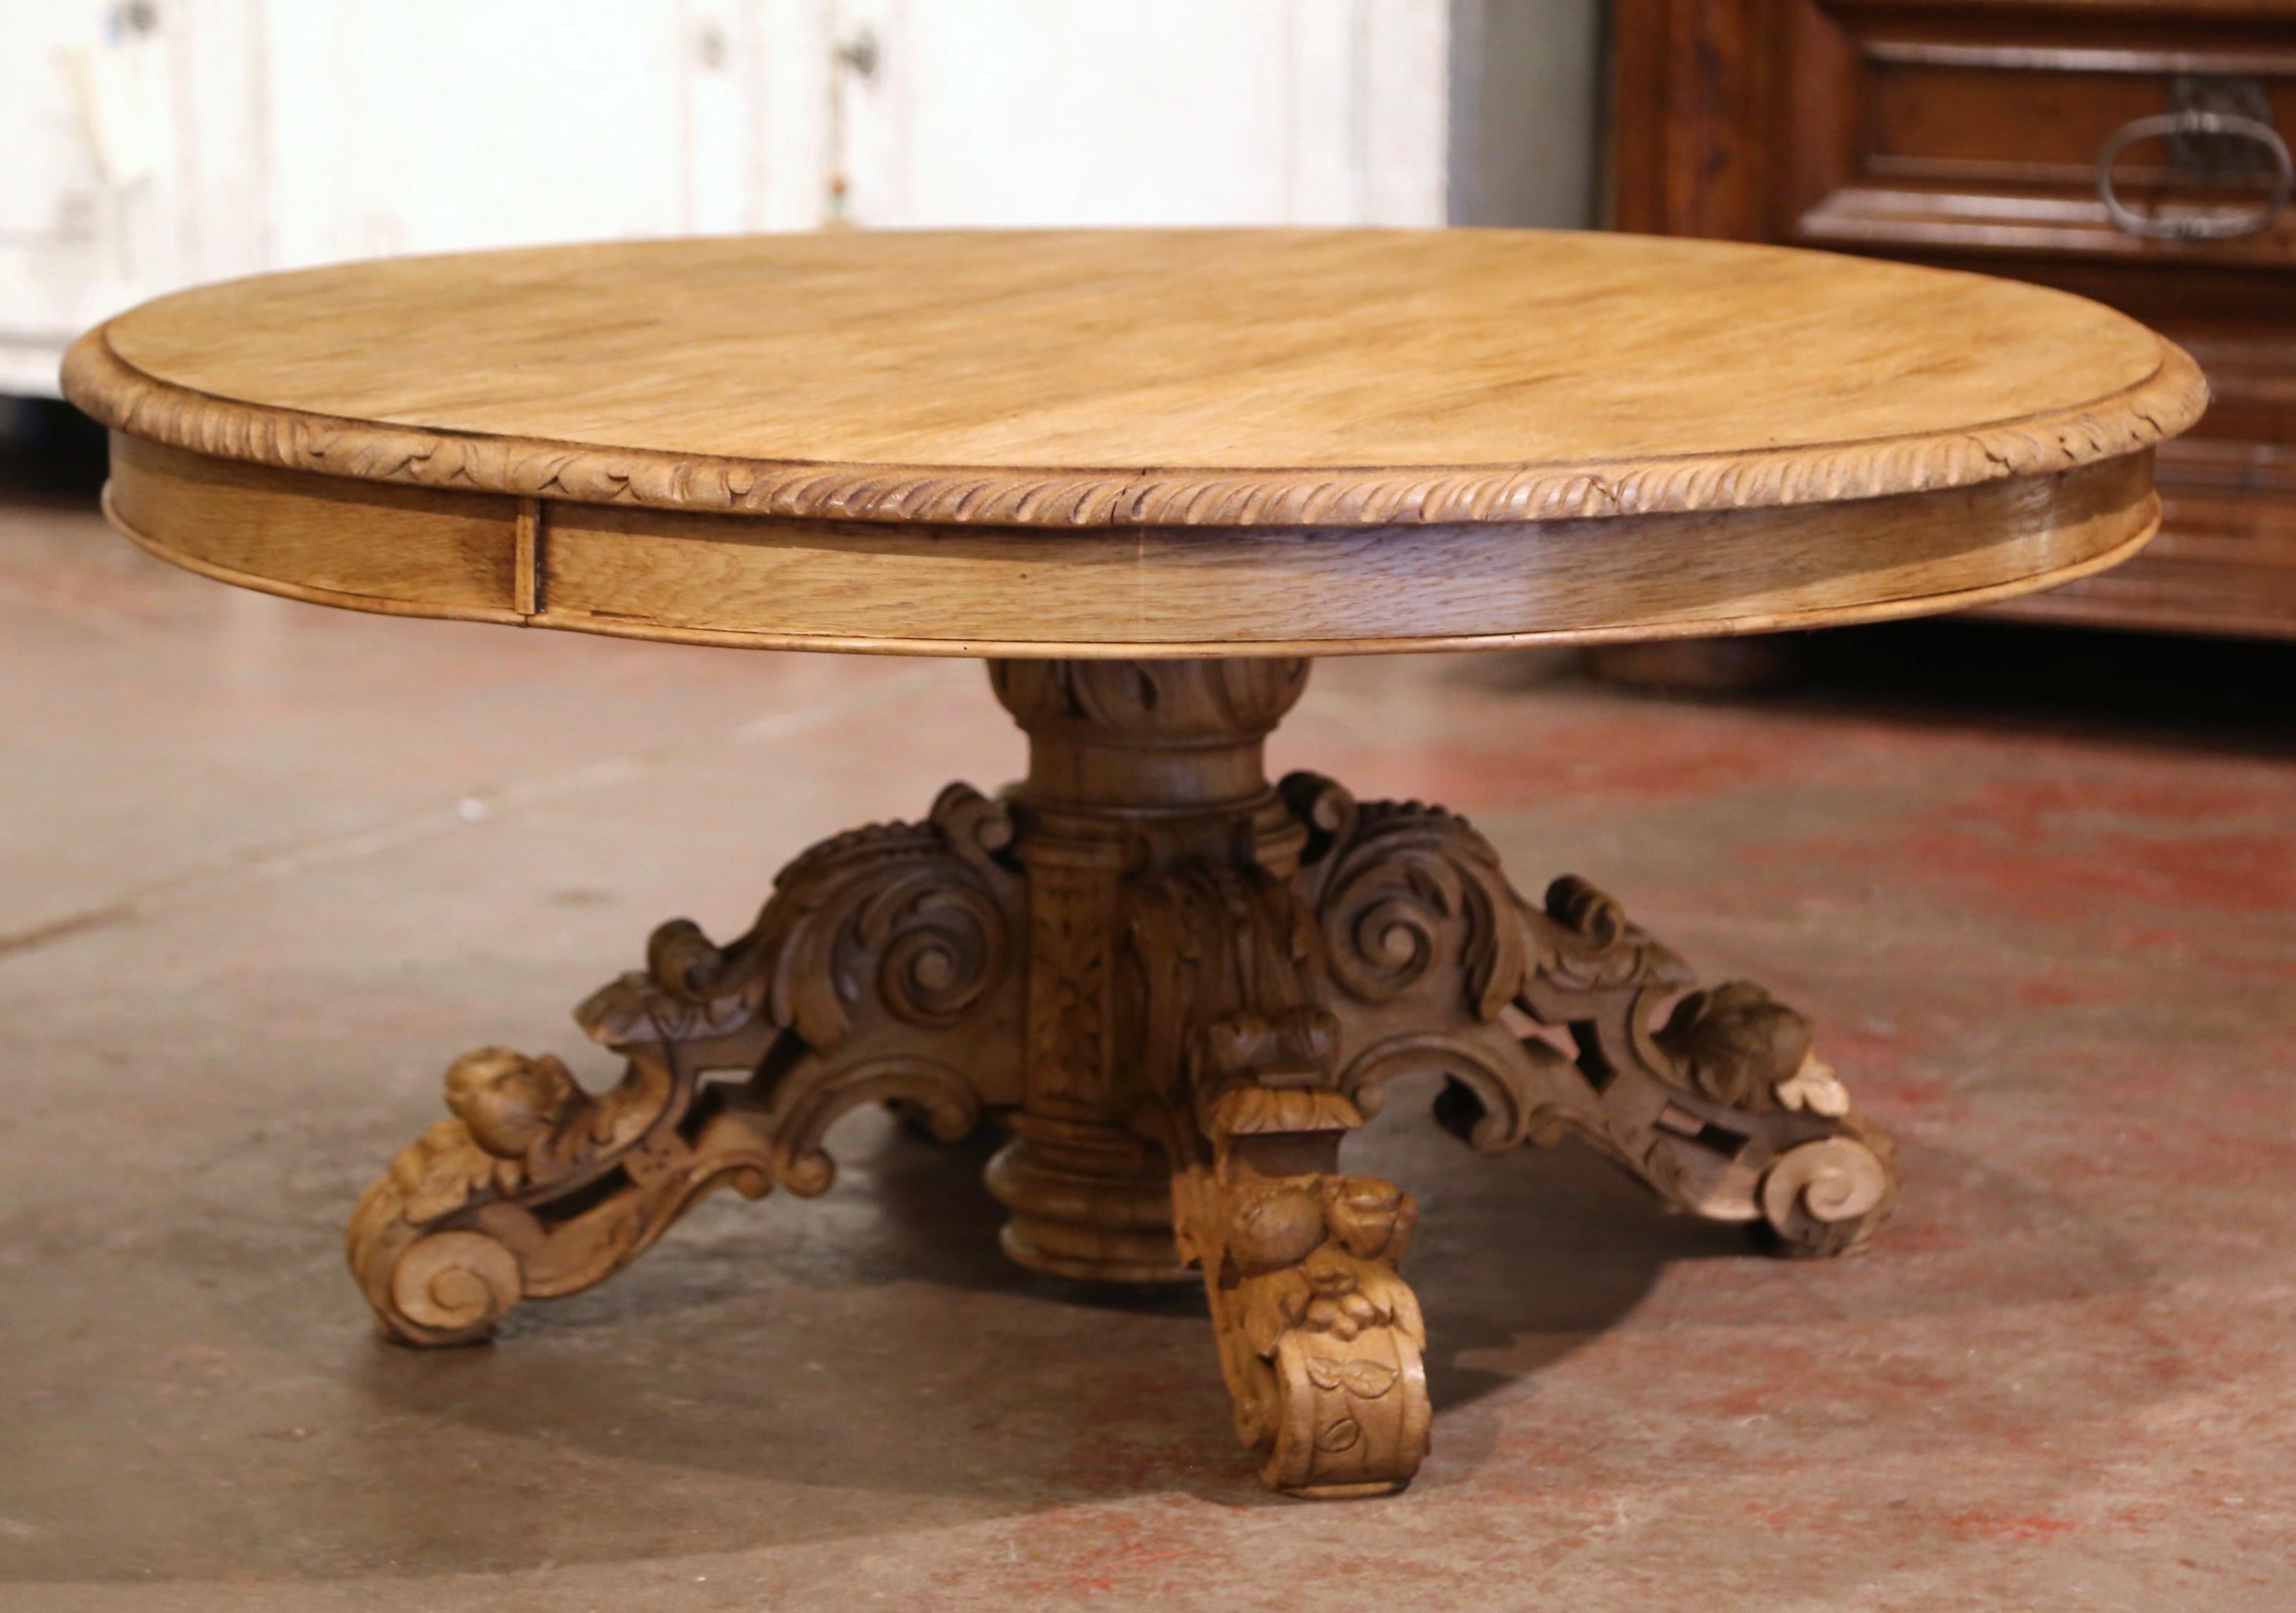 Crafted in northern France circa 1860 and almost round in shape, the antique coffee table stands on an elegant pedestal base dressed with hand carved acanthus leaves, over four legs decorated with fruit motifs. The sturdy Louis XIII style cocktail